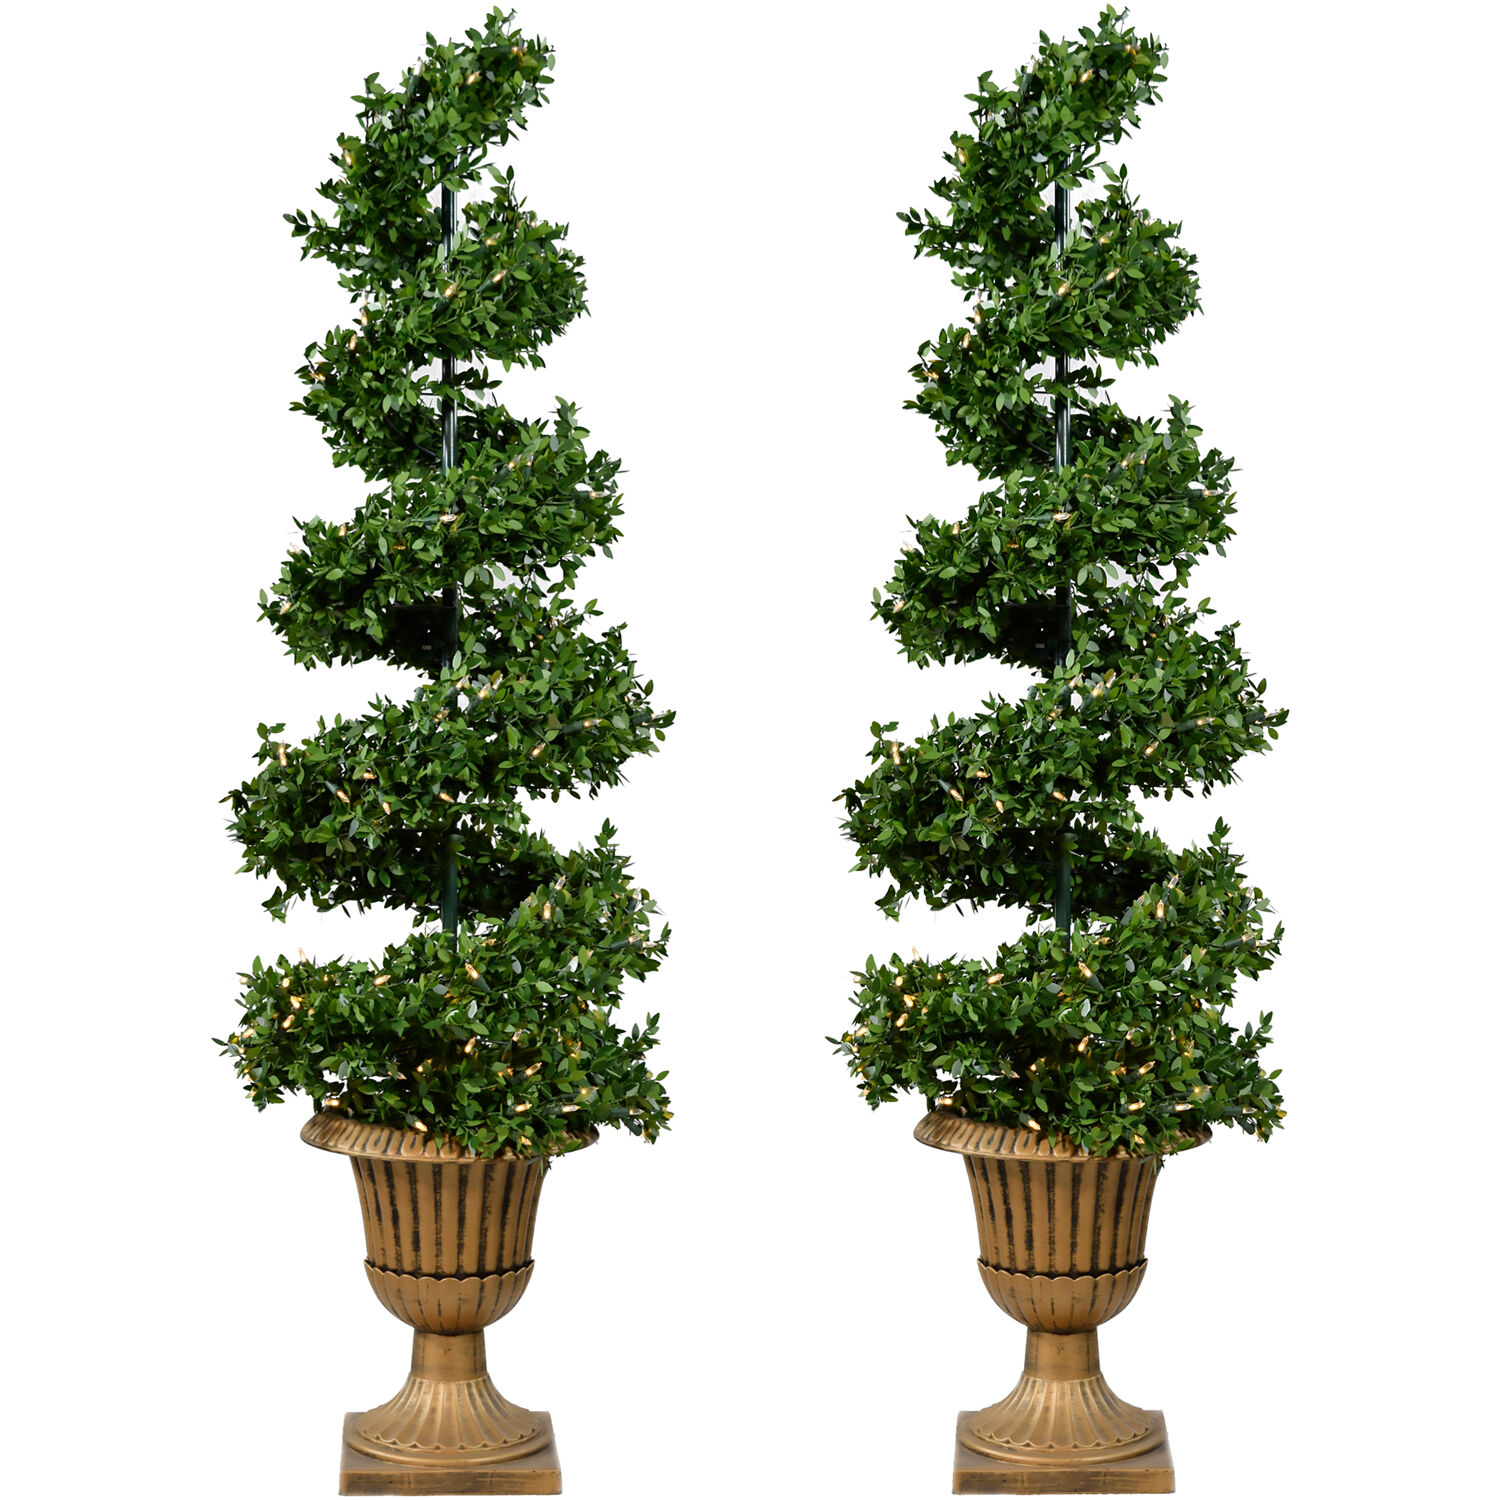 5-Ft Set of 2 Boxwood Spiral Porch Accent Trees in Gold Urn Pot with Warm White LED Lighting - image 1 of 5